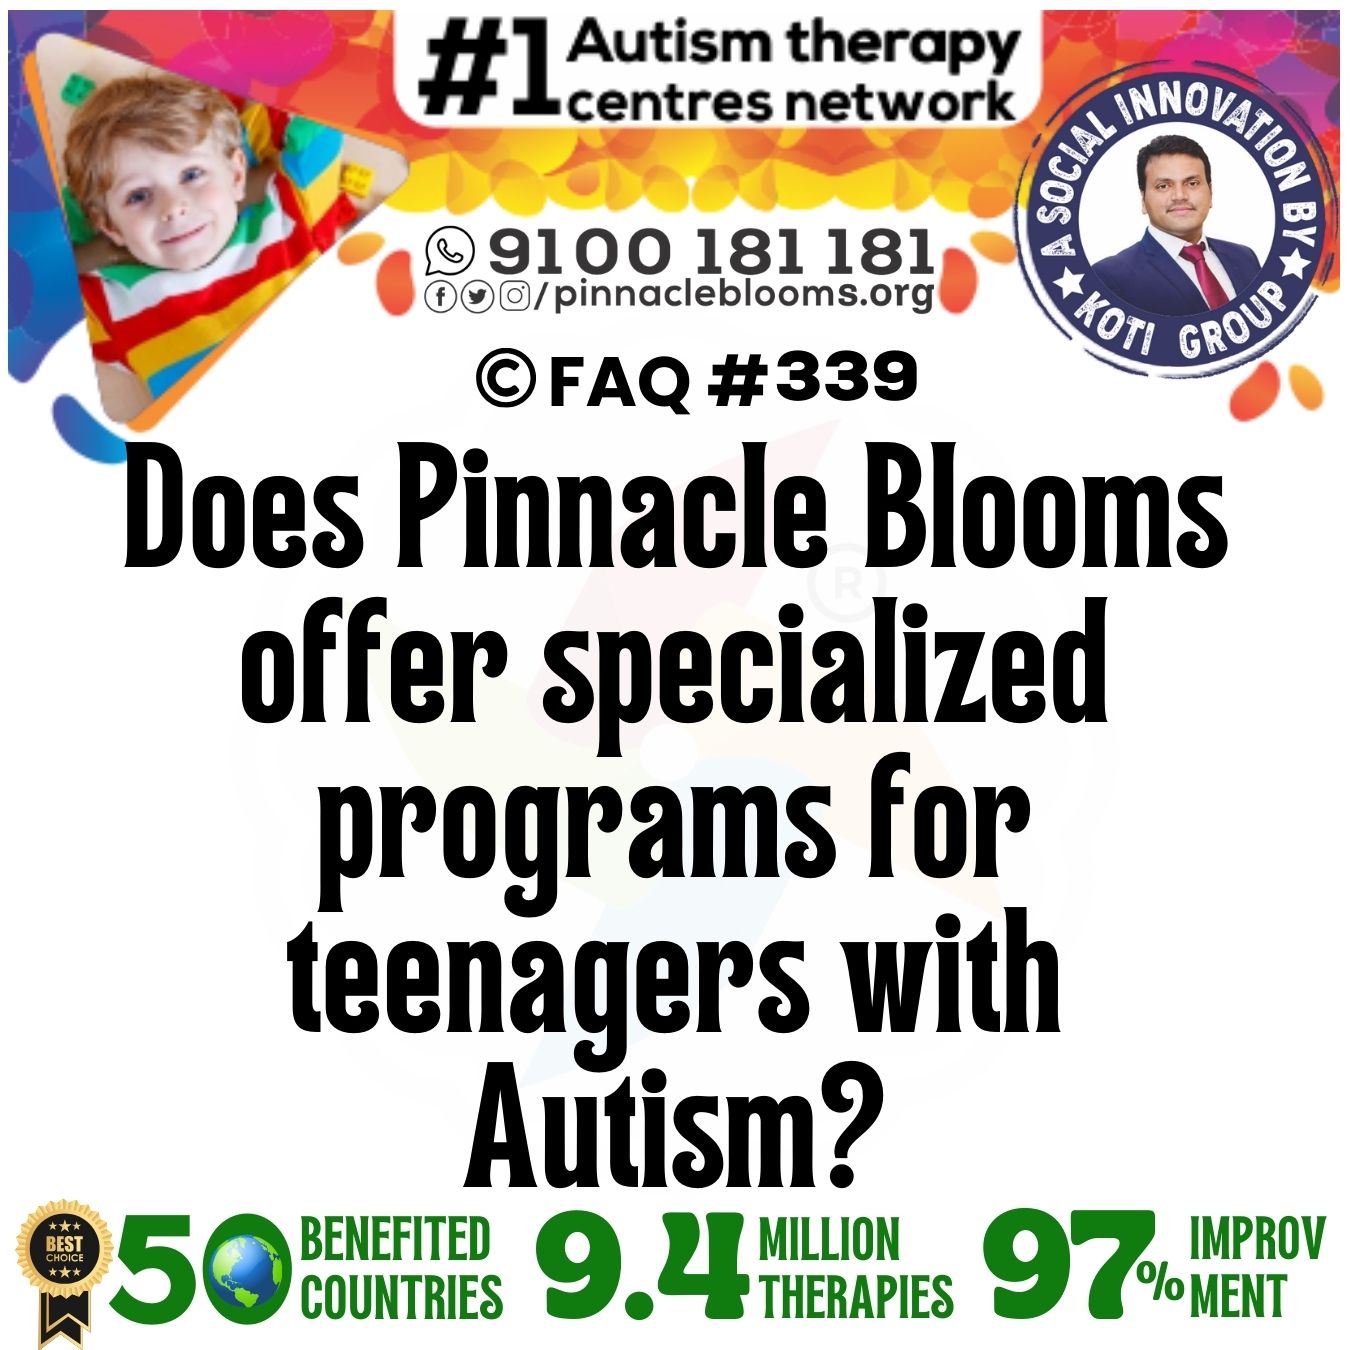 Does Pinnacle Blooms offer specialized programs for teenagers with Autism?